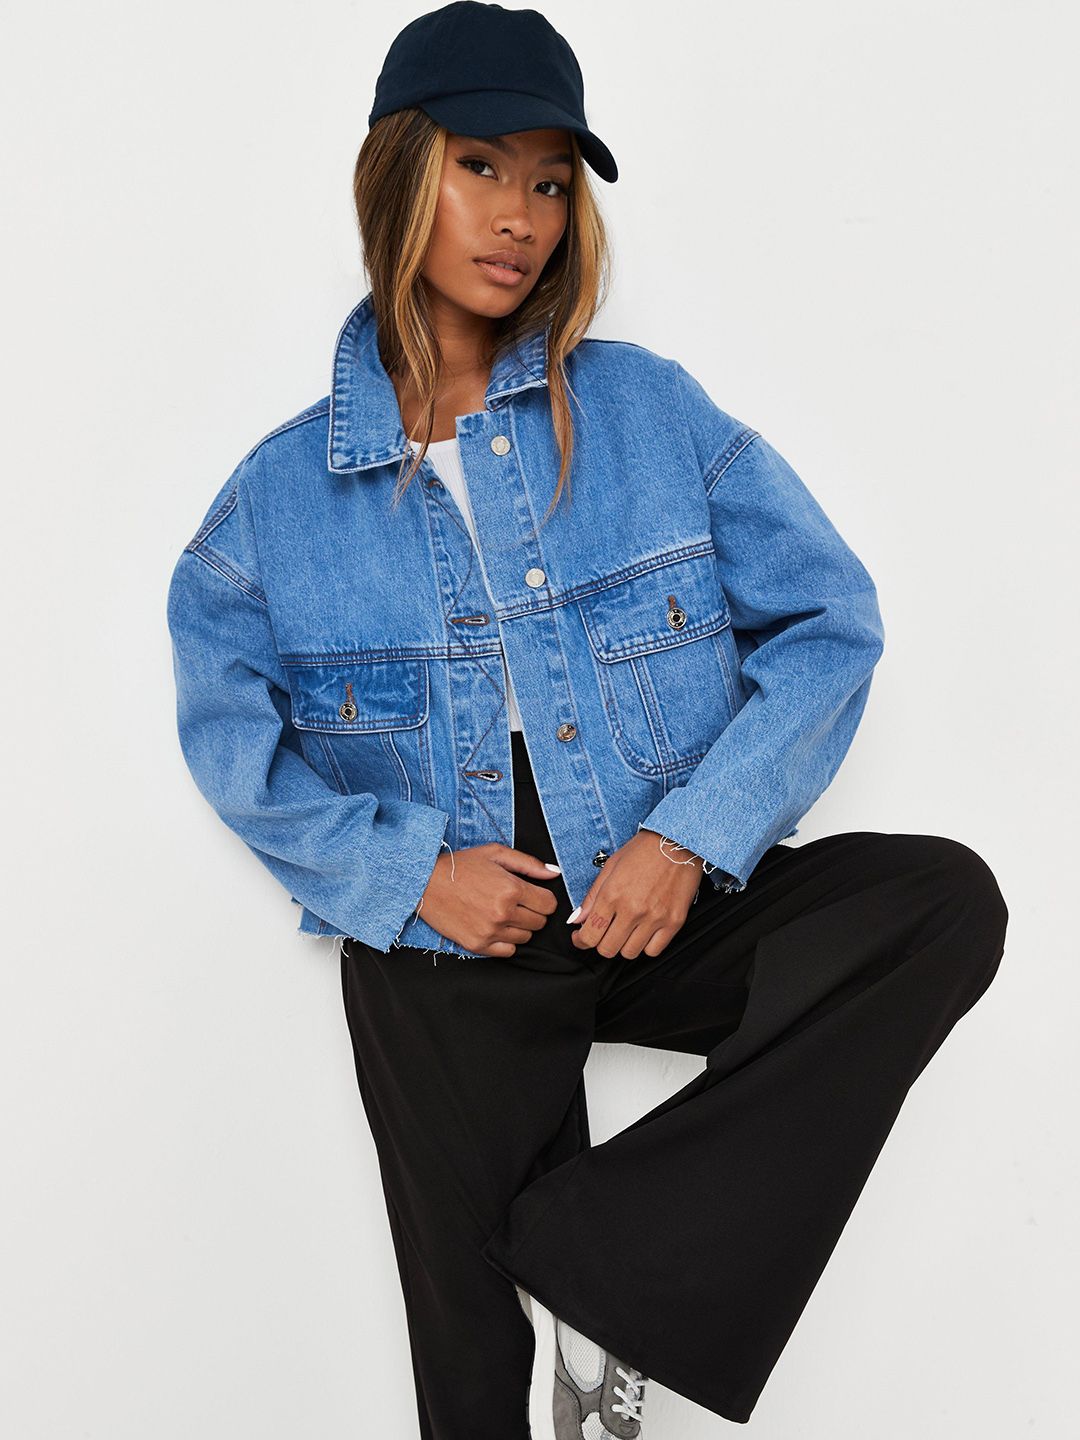 Missguided Women Blue Washed Cotton Denim Jacket with Oversized Flap Pockets Price in India